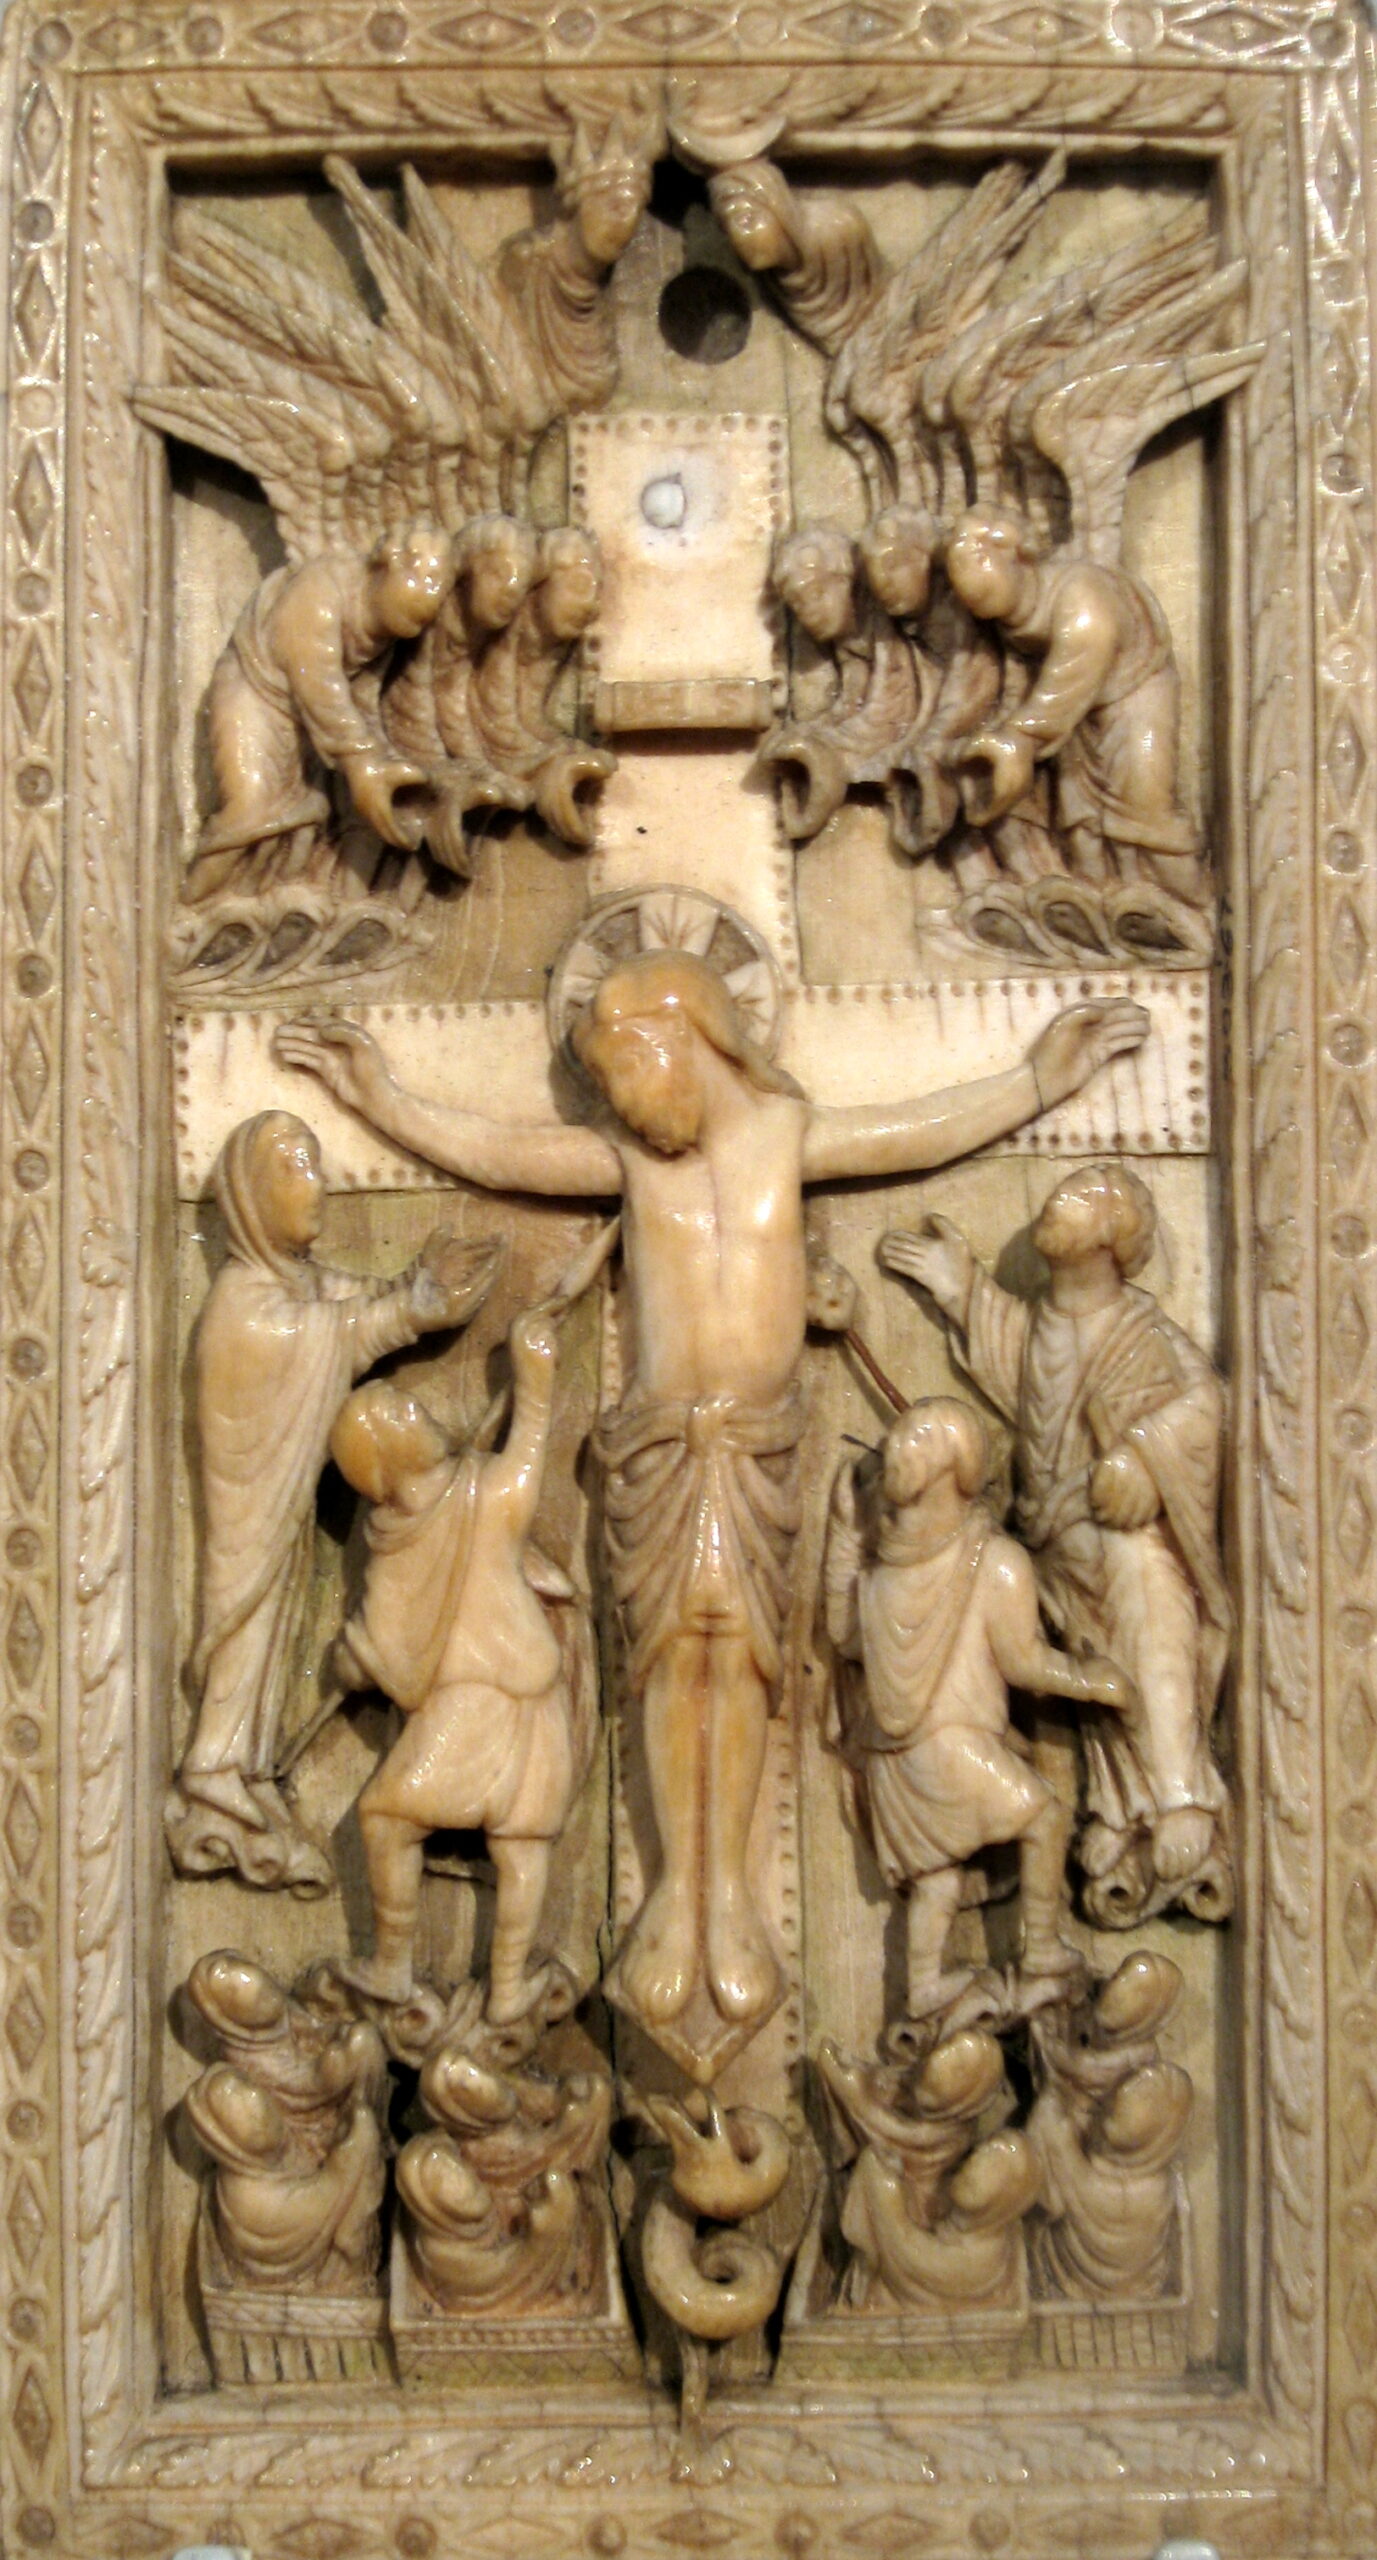 The Crucifixion, 860-70. Ivory panel from Reims, France. Victoria and Albert Museum